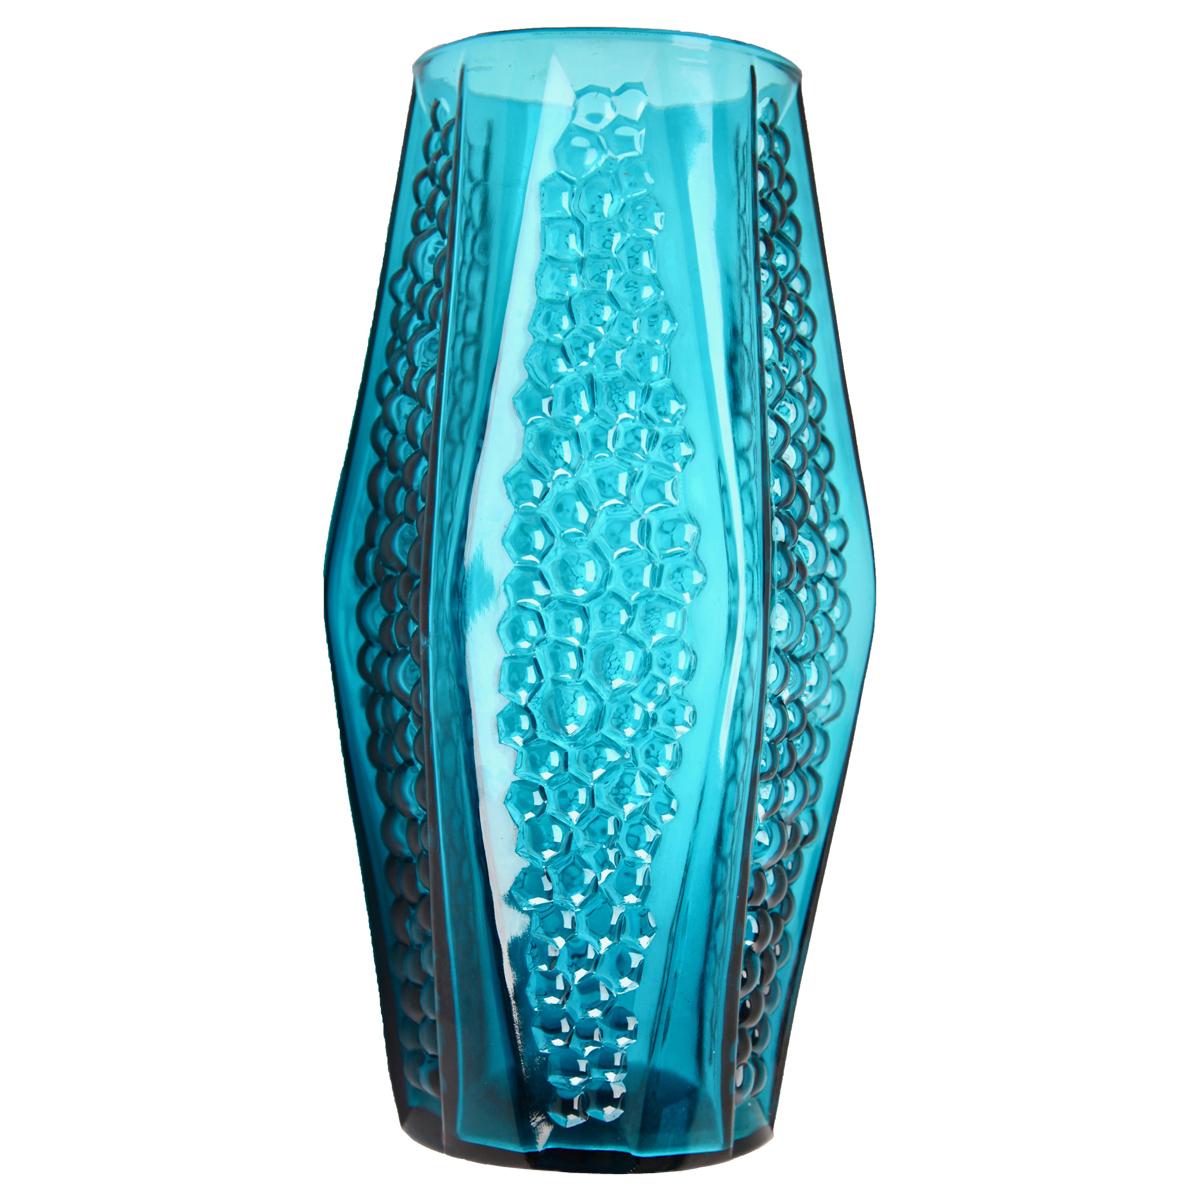 Stolle-Nieman 'Attributed' Hexagonal Vase with Bubbled Texture, 1970s For Sale 1